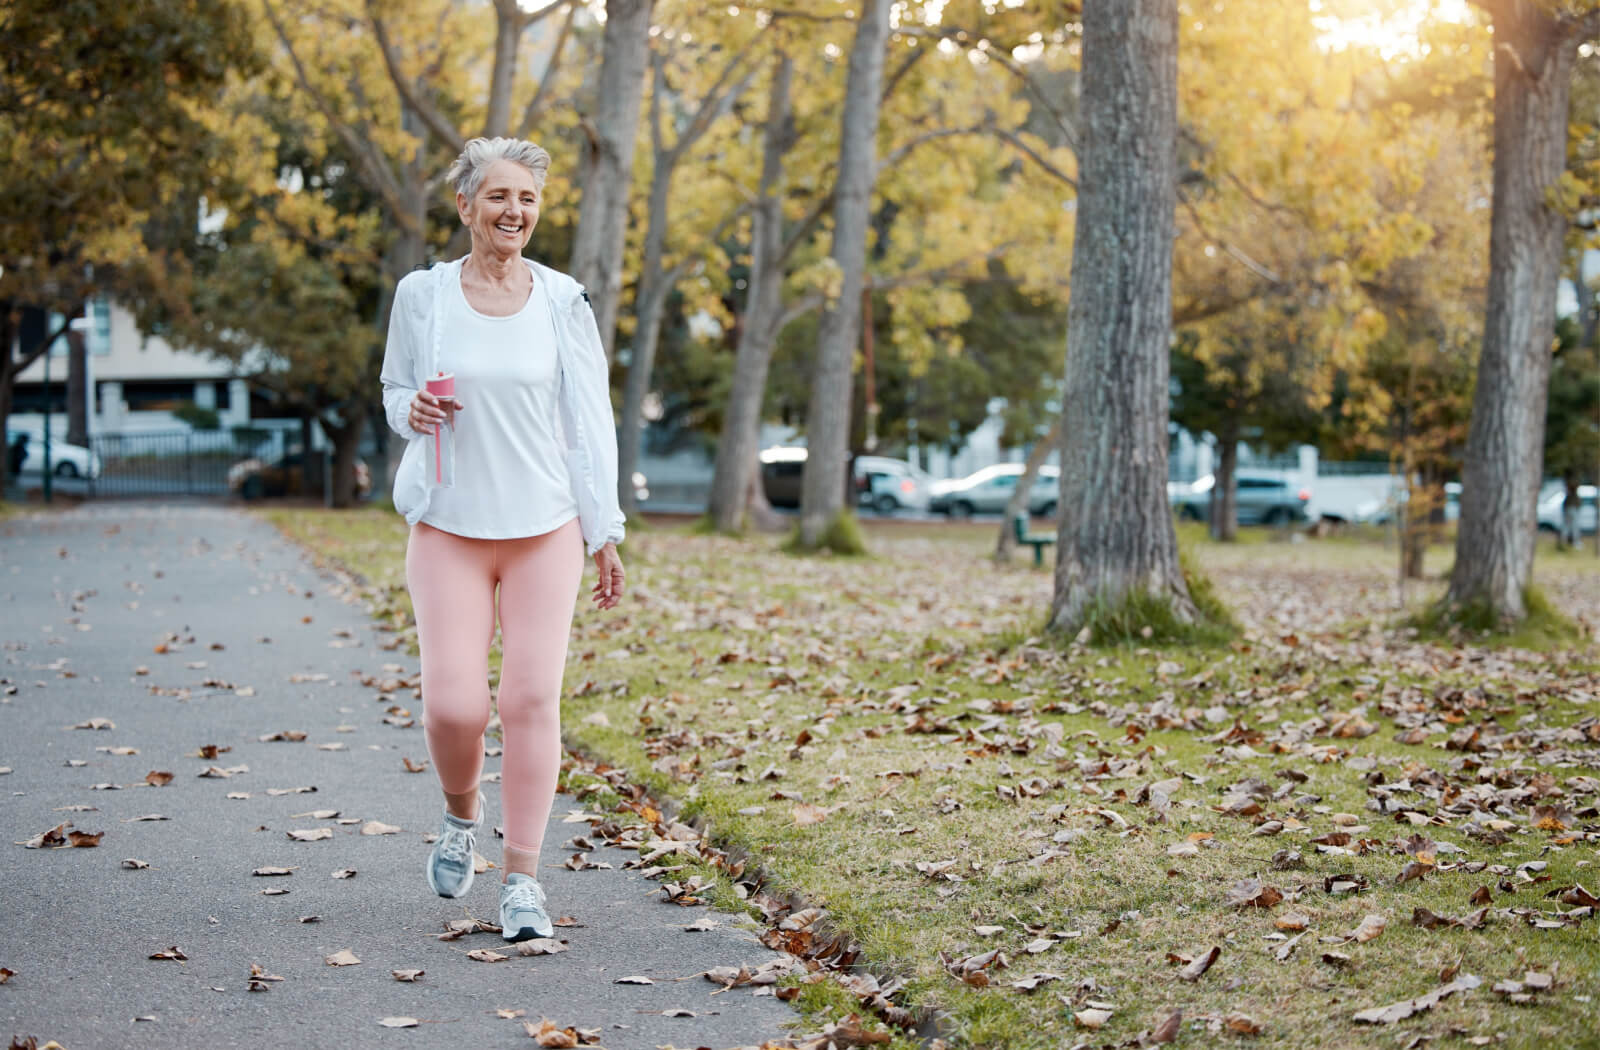 A senior woman in active wear taking an early morning walk as a part of her routine.